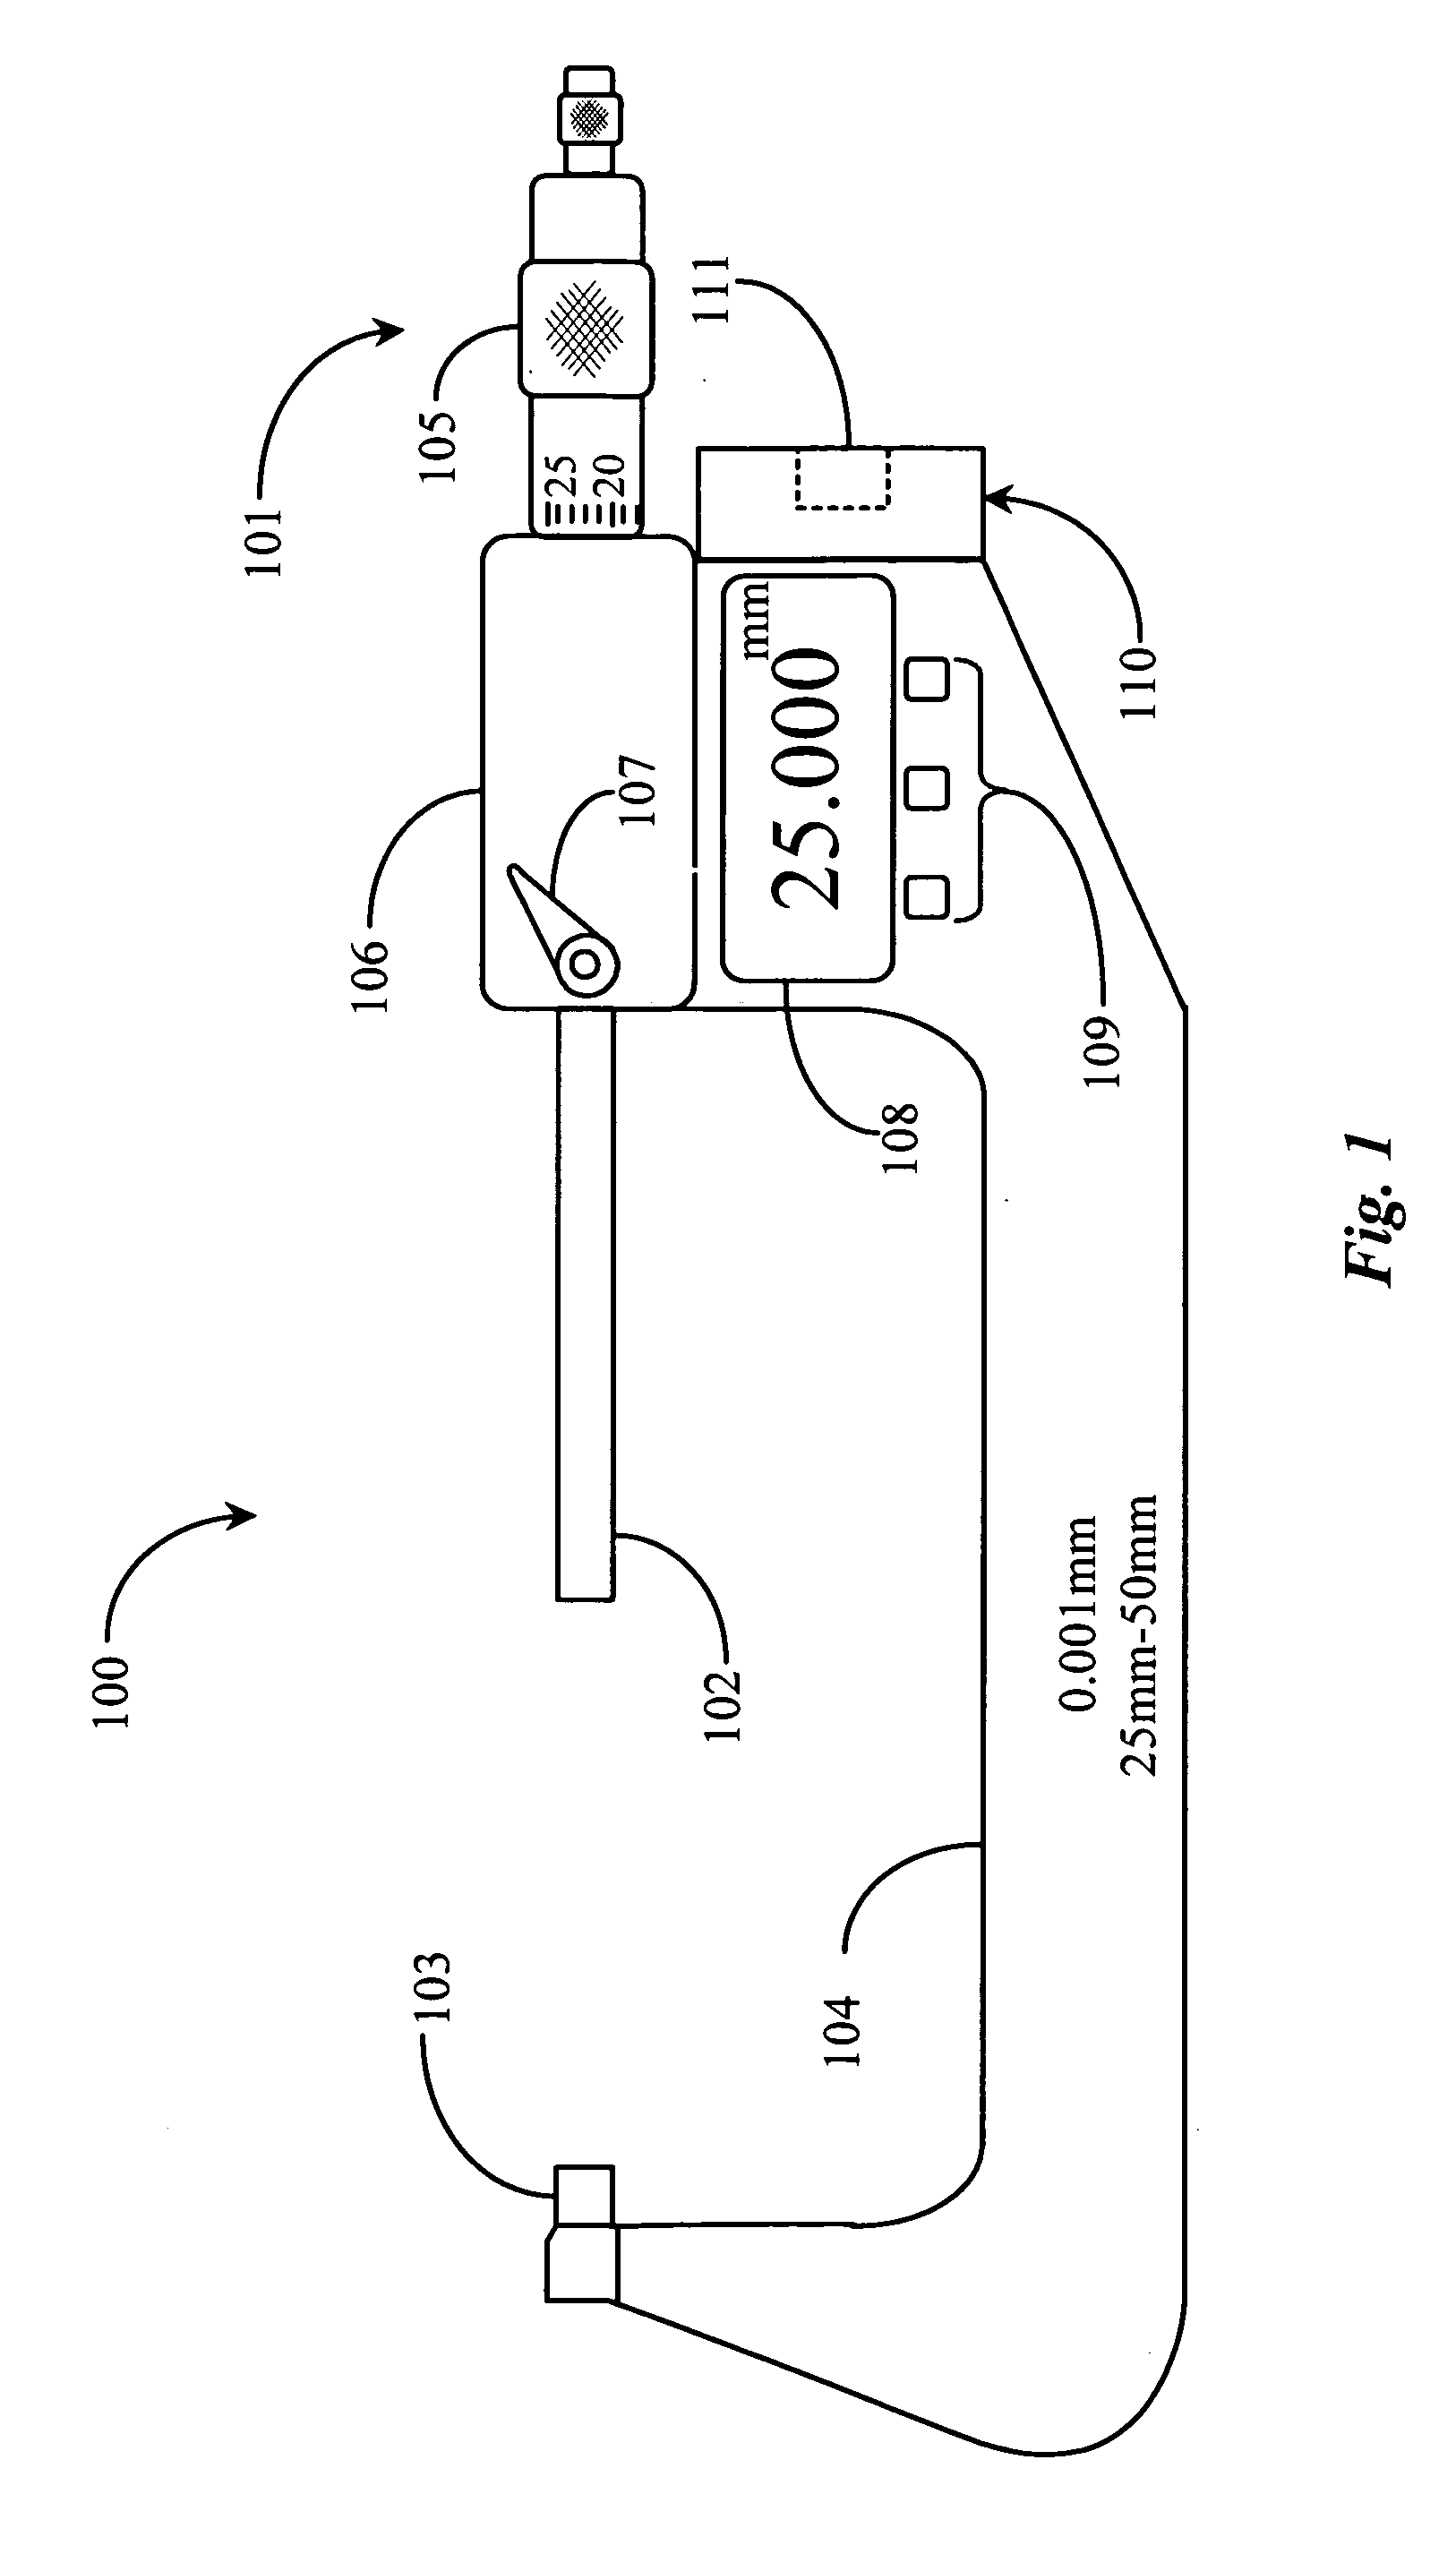 System for wireless local display of measurement data from electronic measuring tools and gauges